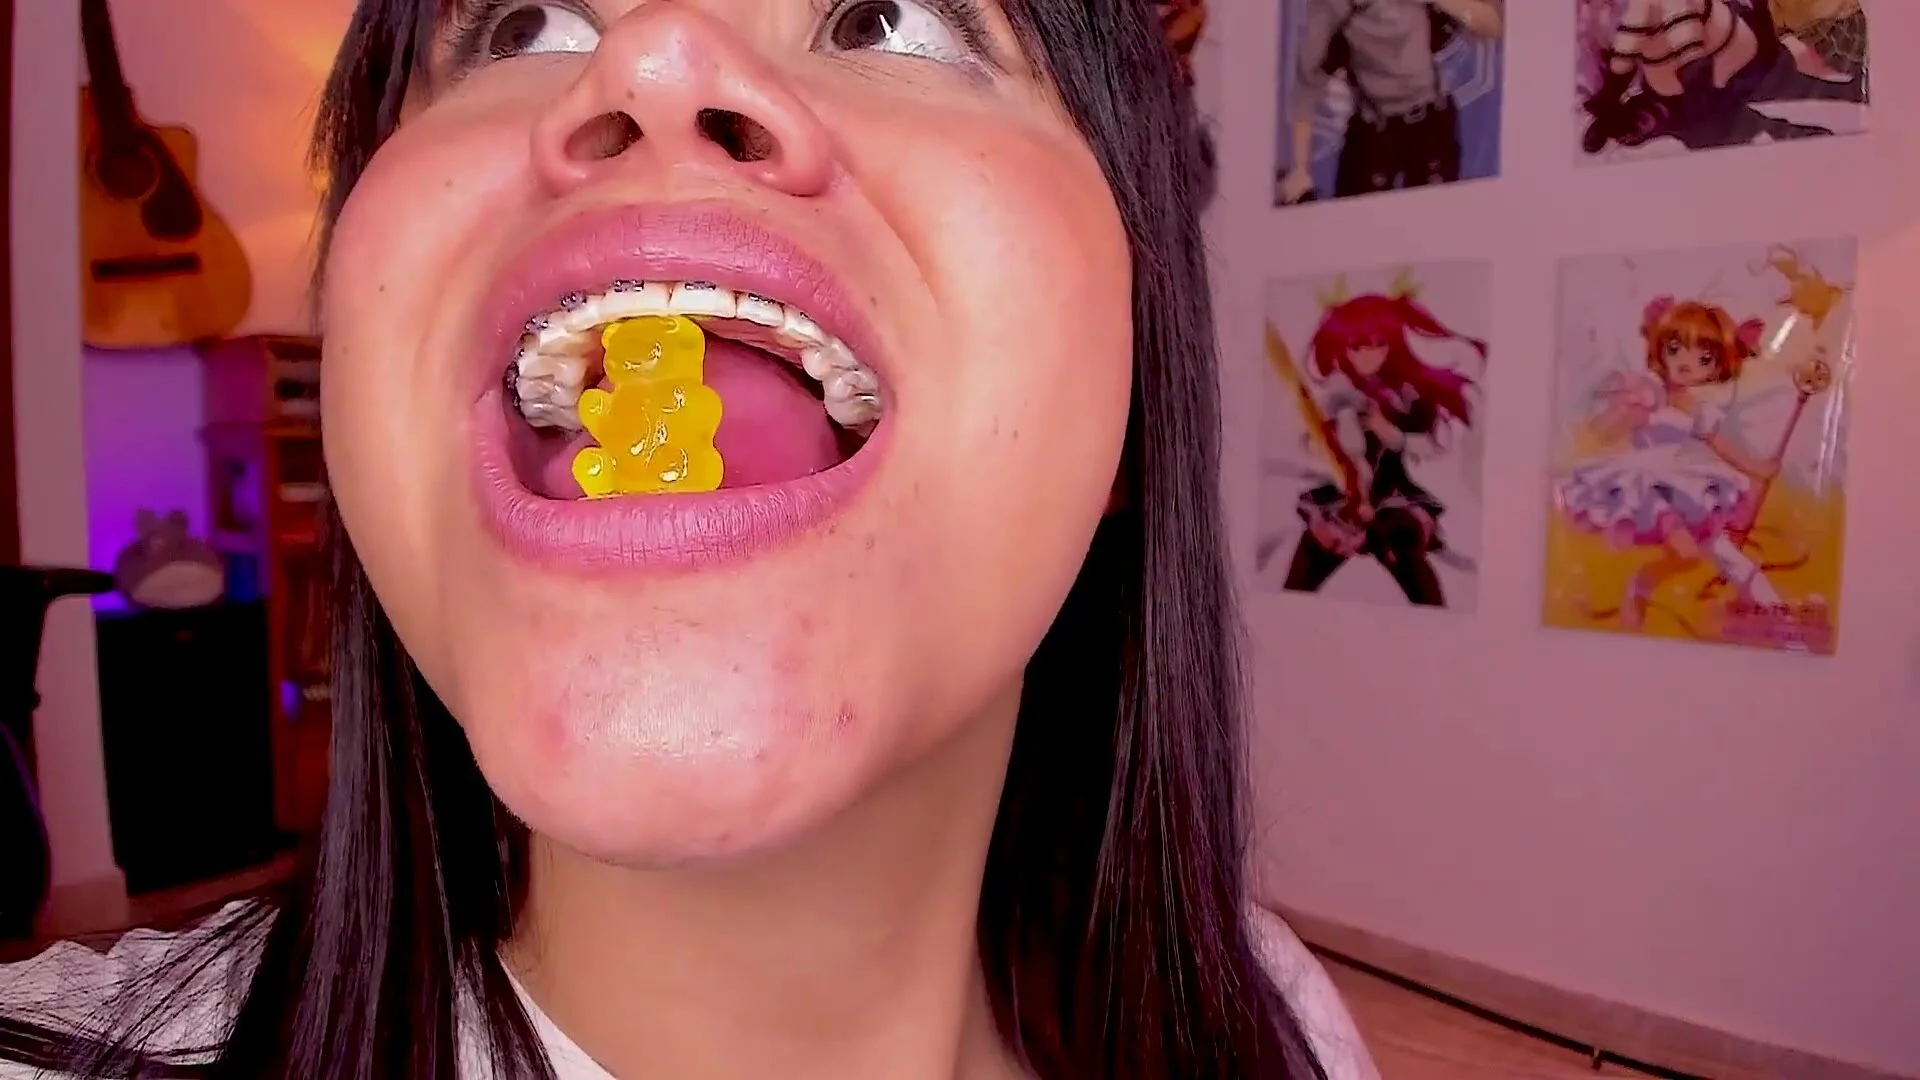 Giantess Vore gummy bear fetish pic picture